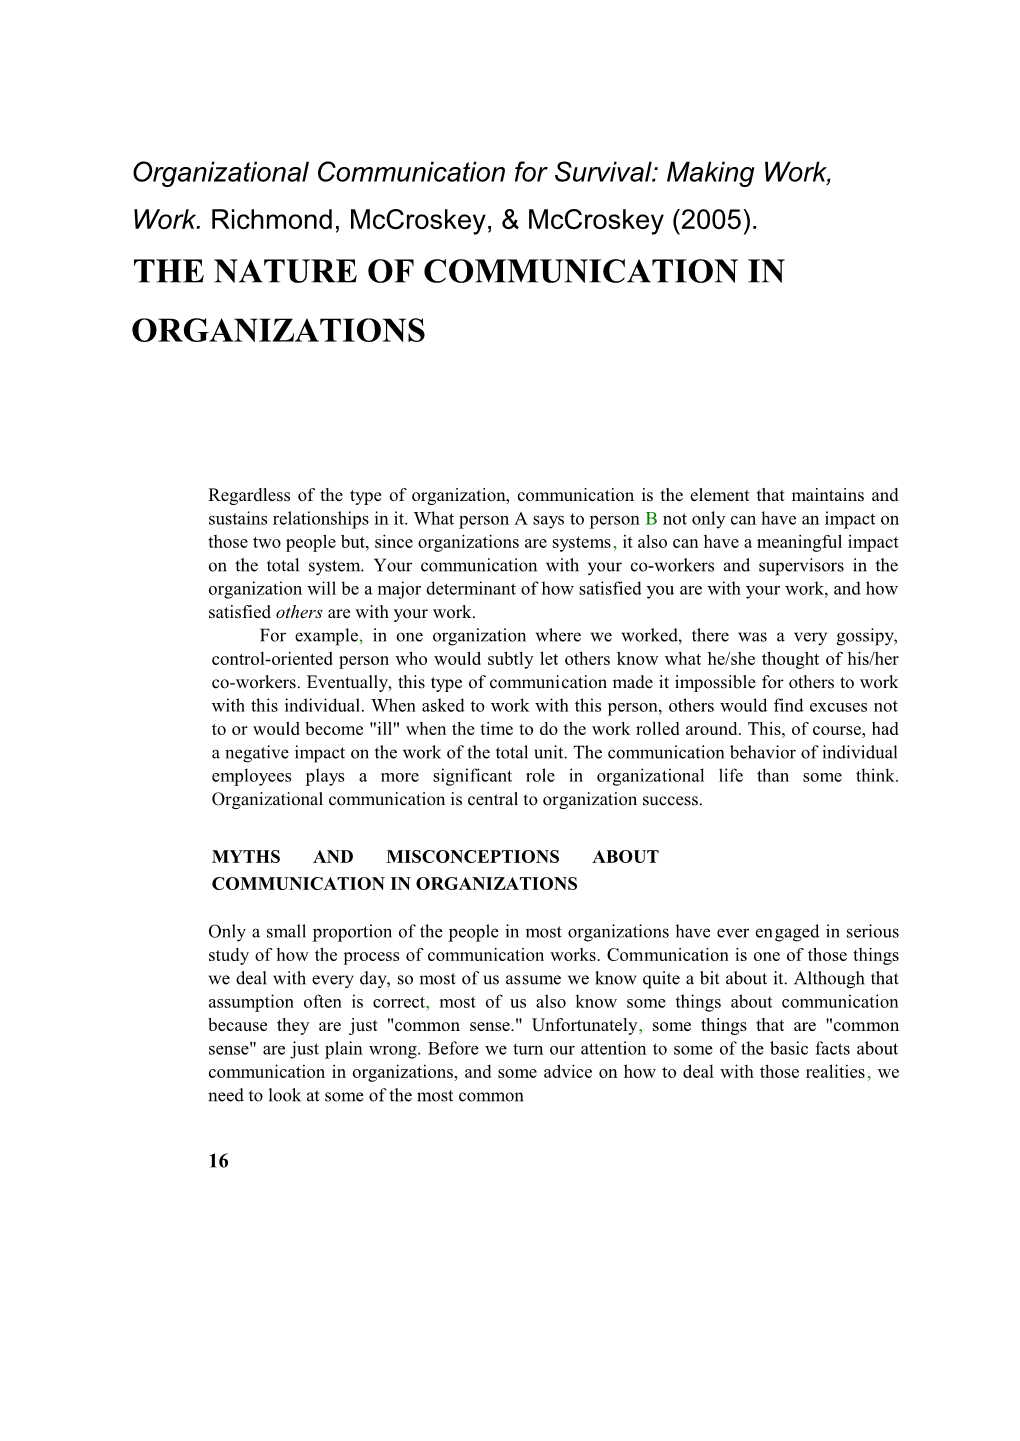 The Nature of Communication in Organizations